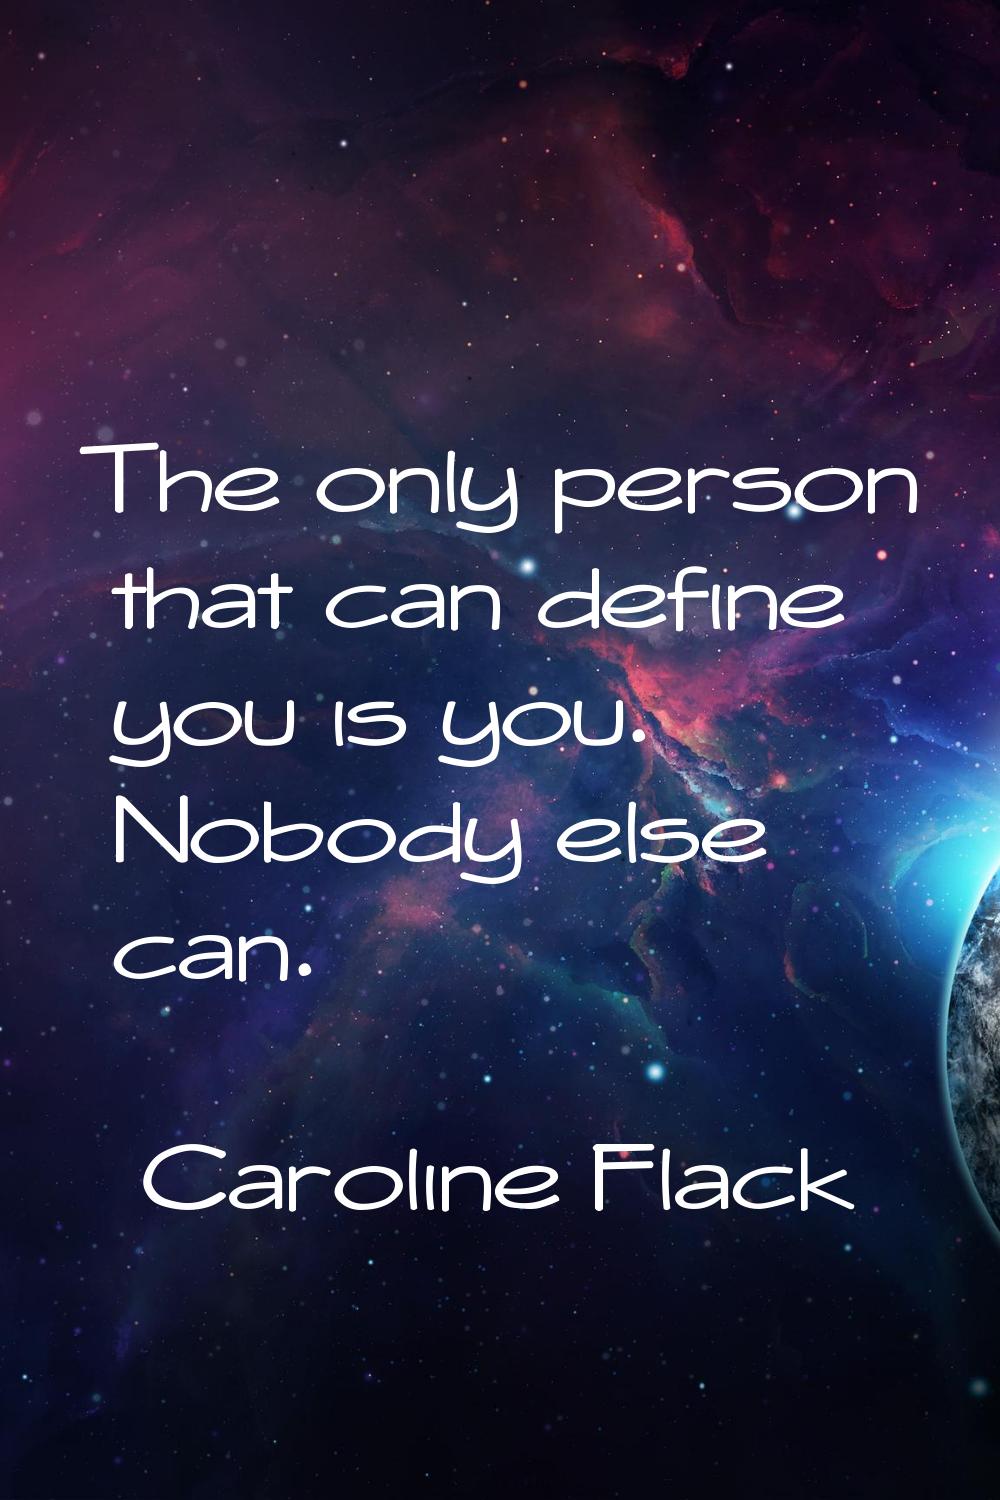 The only person that can define you is you. Nobody else can.